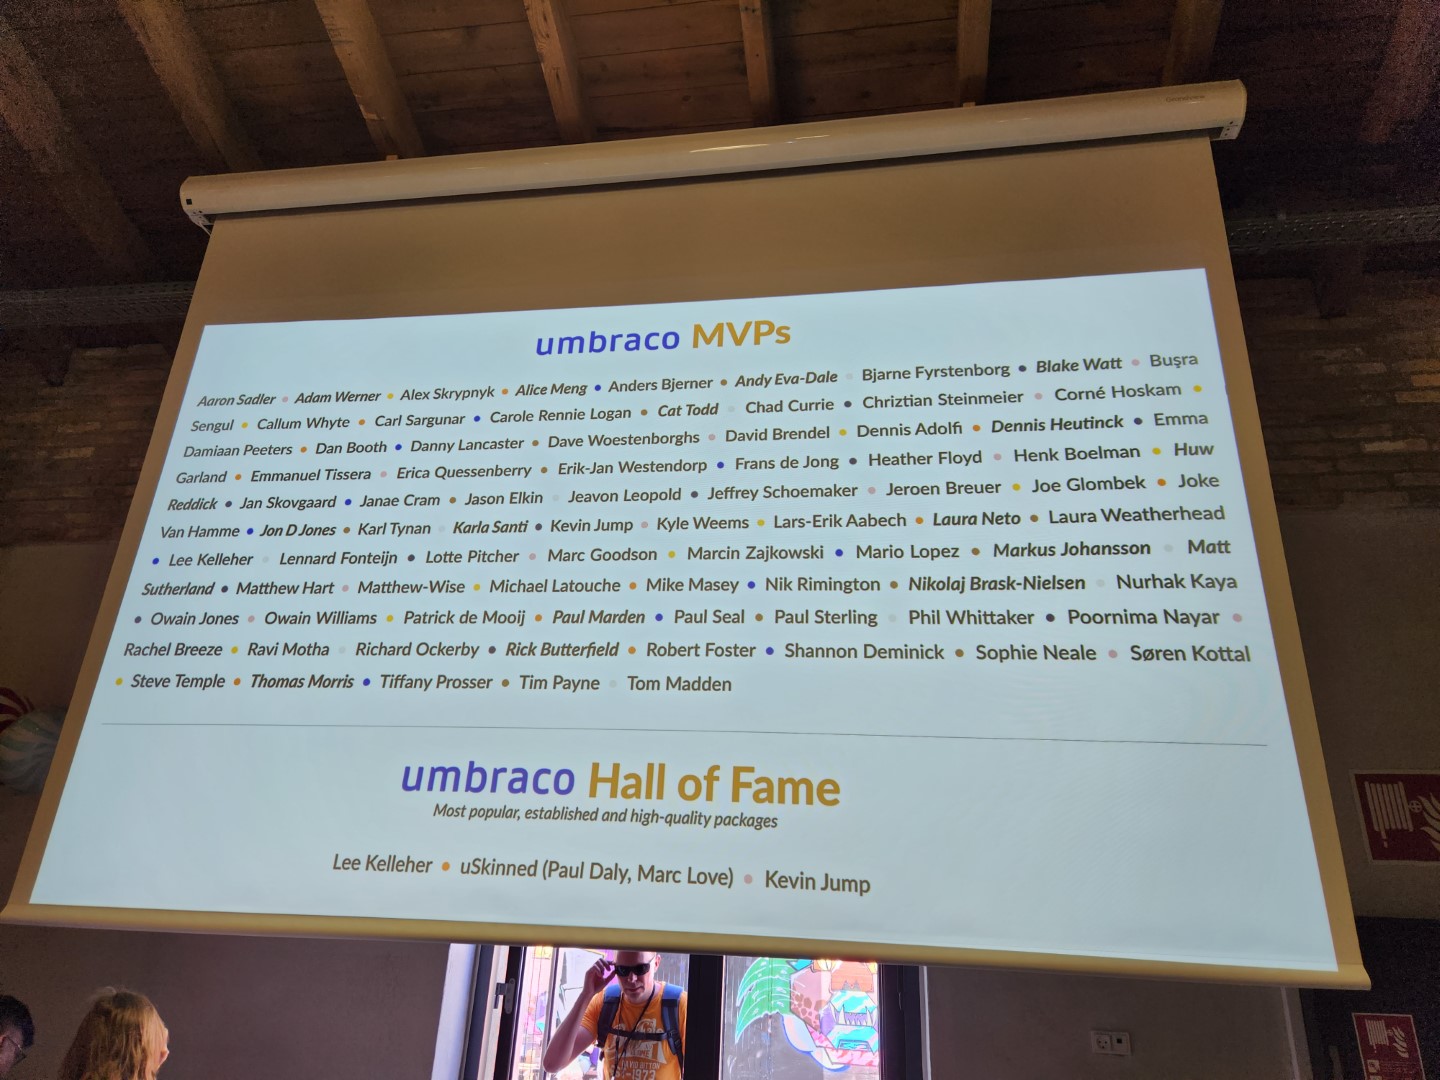 A powerpoint slide projection with 2023 MVP's names on it.